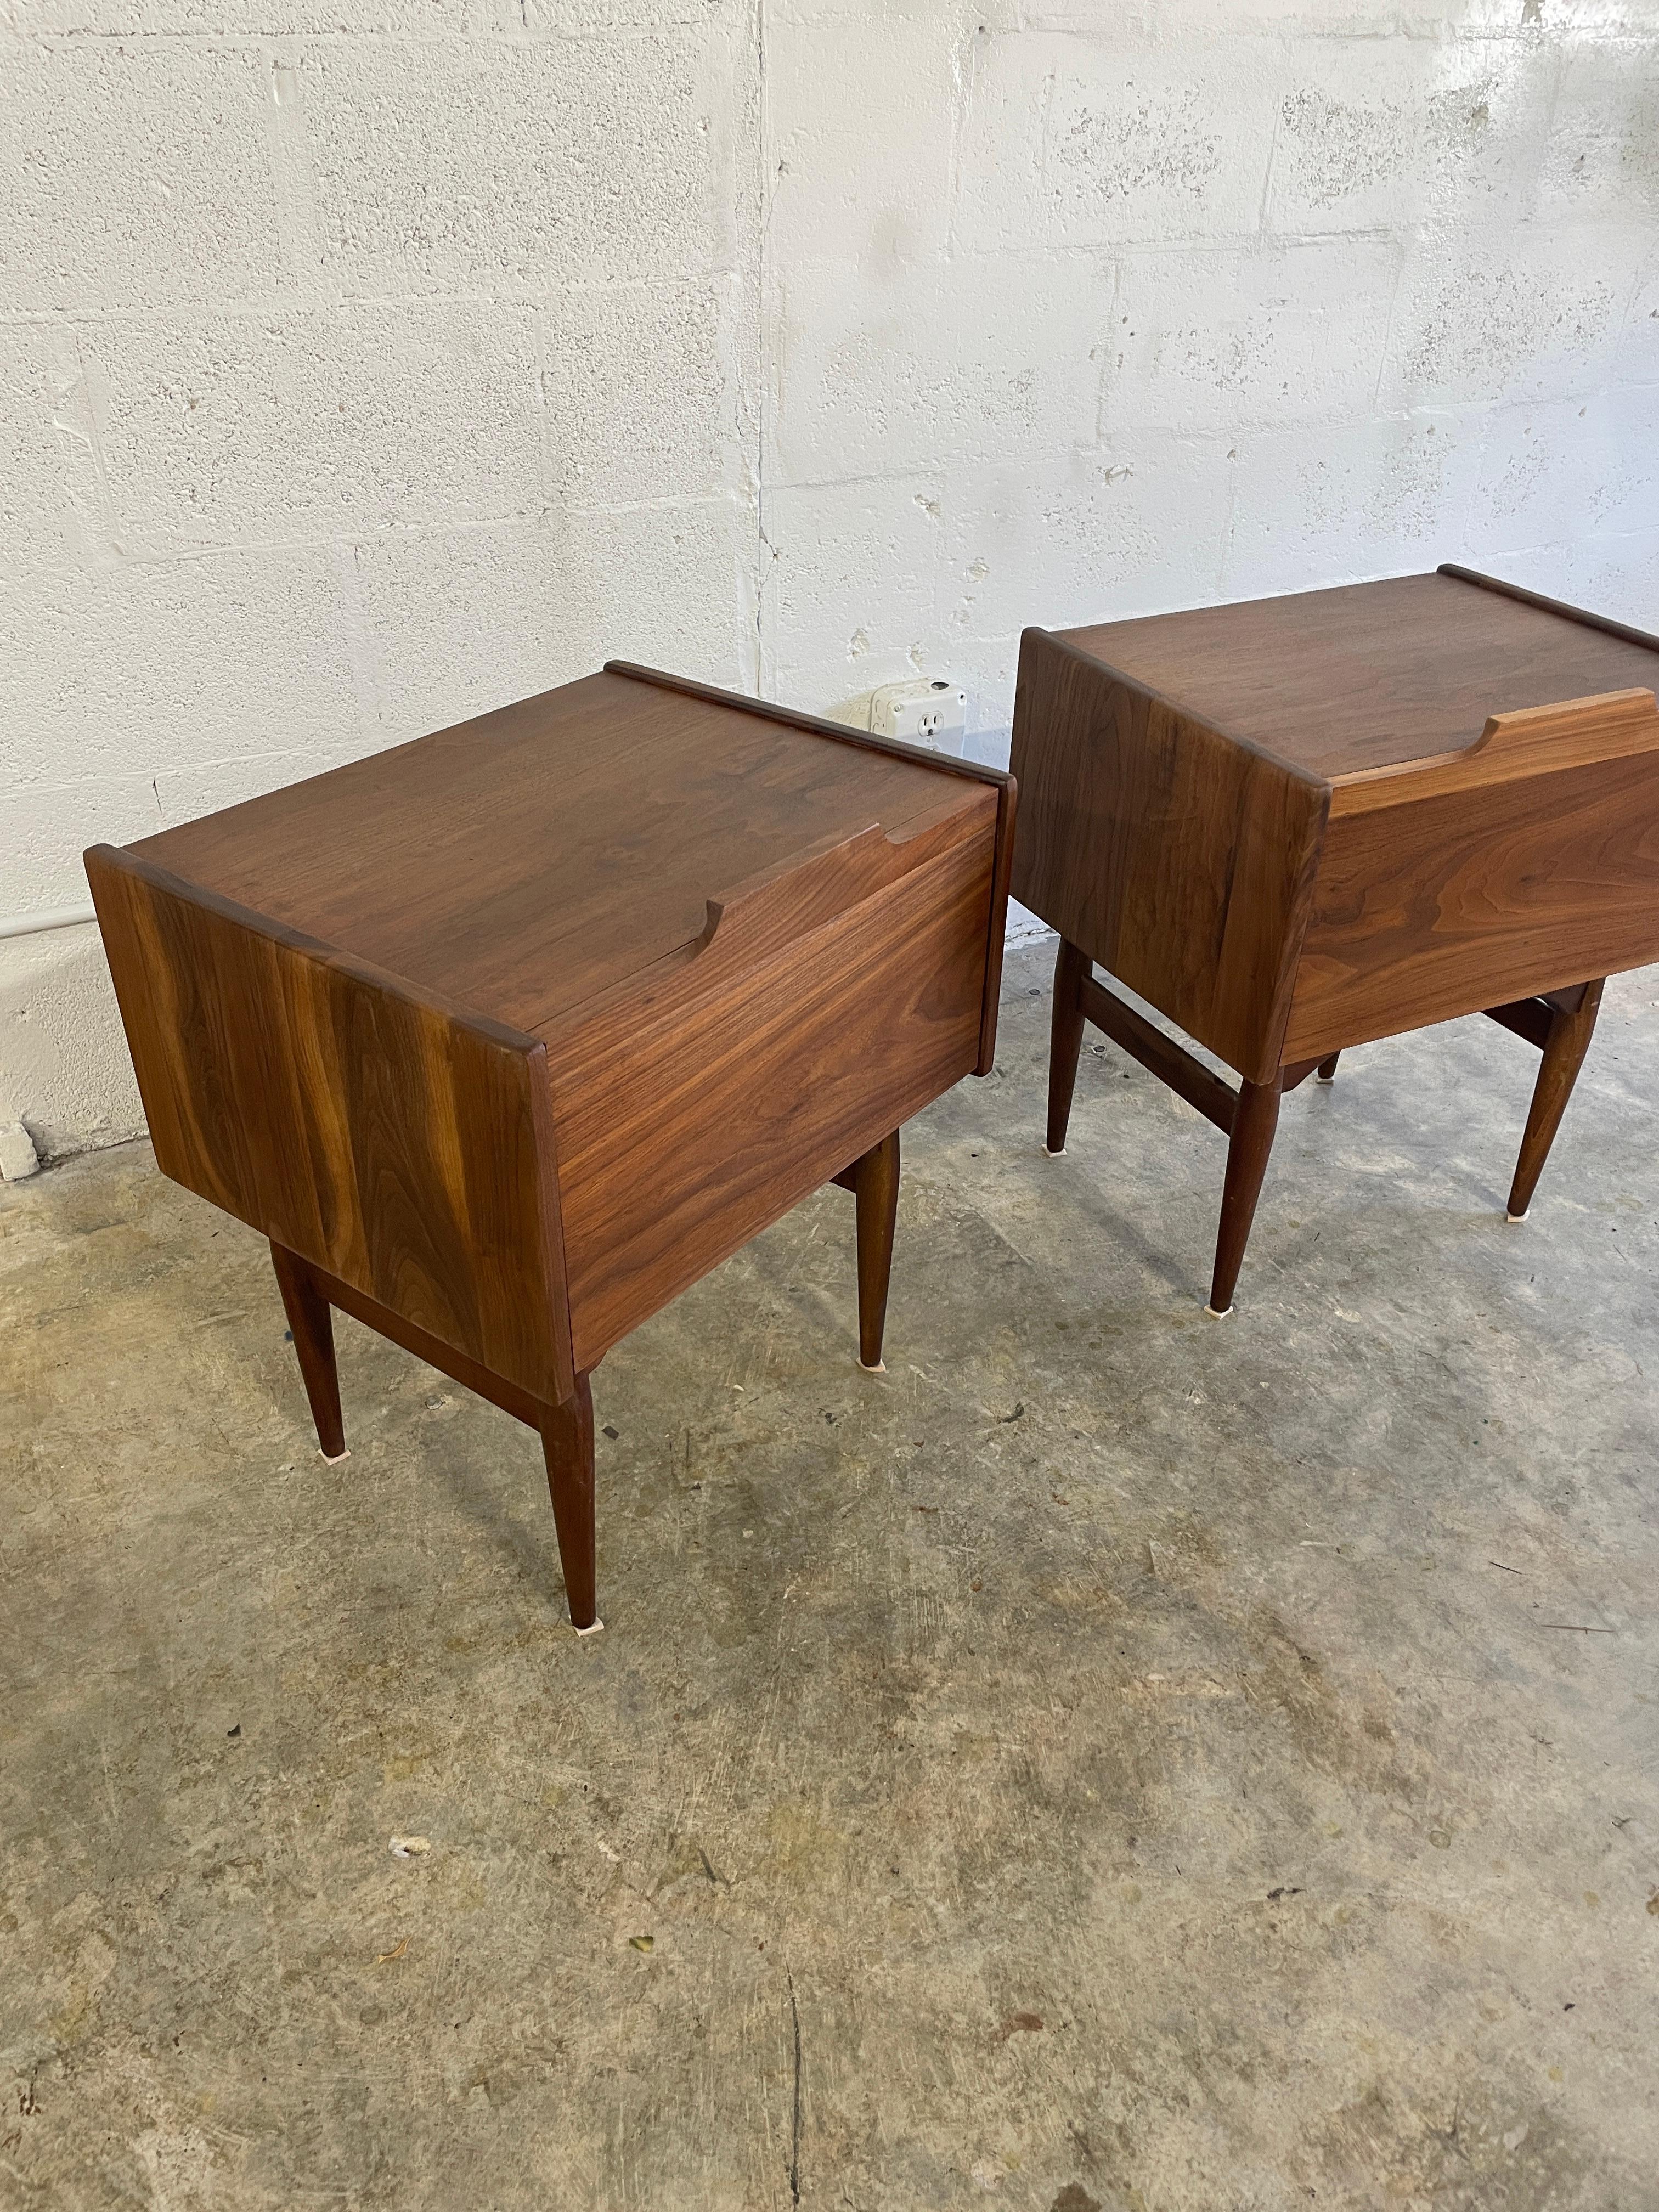 1960s John Caldwell for Brown Saltman Mid Century Dresser Bedroom Set of 3 In Good Condition For Sale In Fort Lauderdale, FL